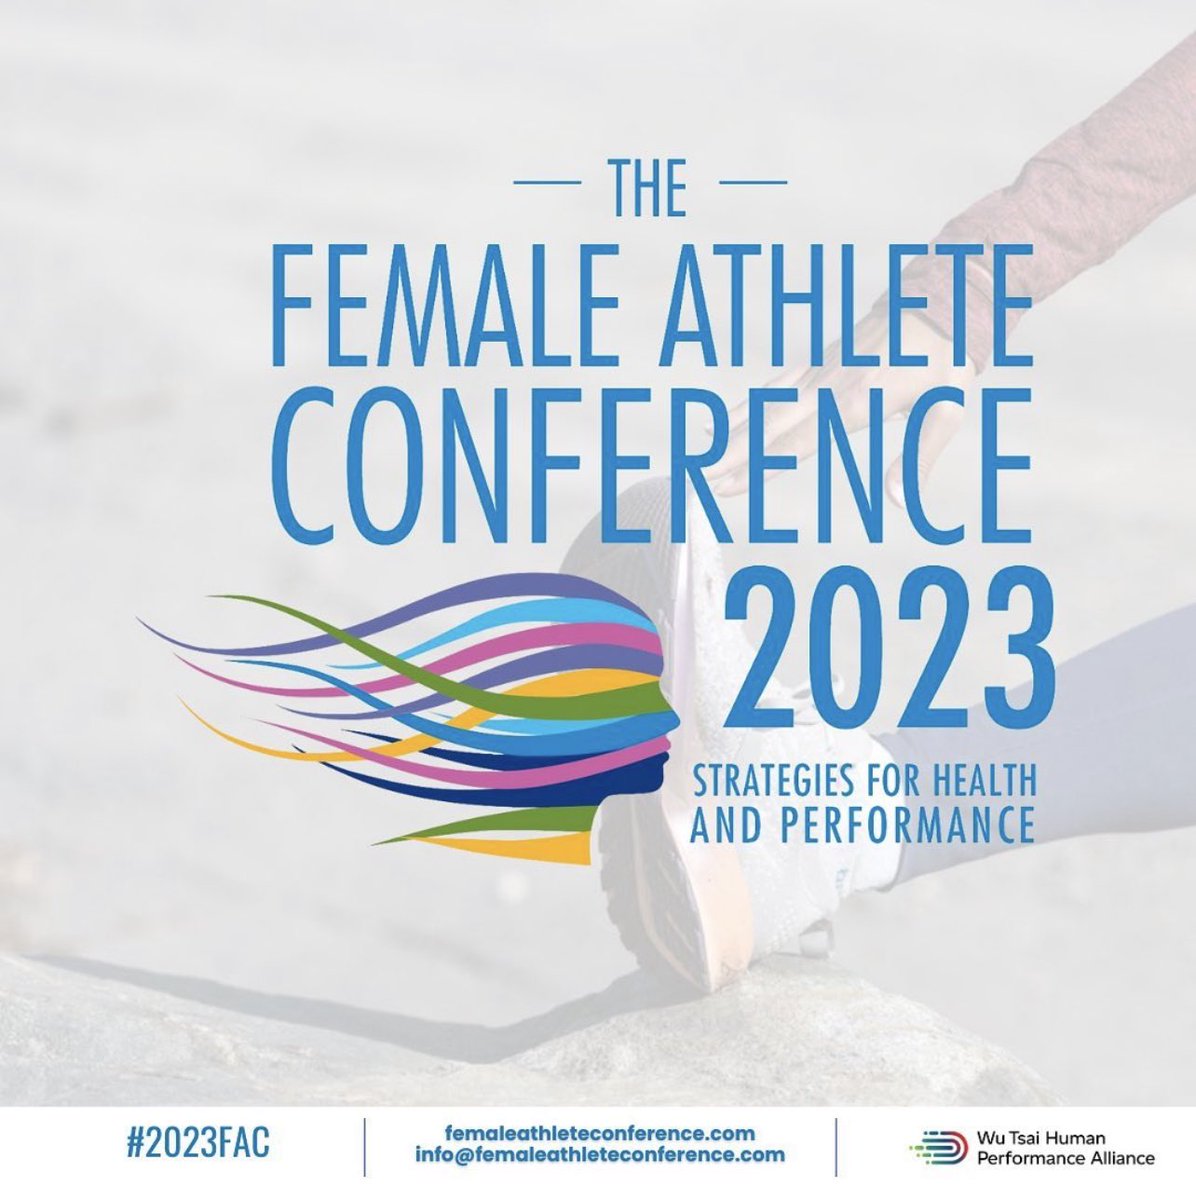 For years we’ve discussed how limited investment & research into girls/women’s bodies affects performance, injury prevention & recovery and more. The conversations here at @FemaleAthConf are so important & necessary to improving education and gaining knowledge. #2023FAC